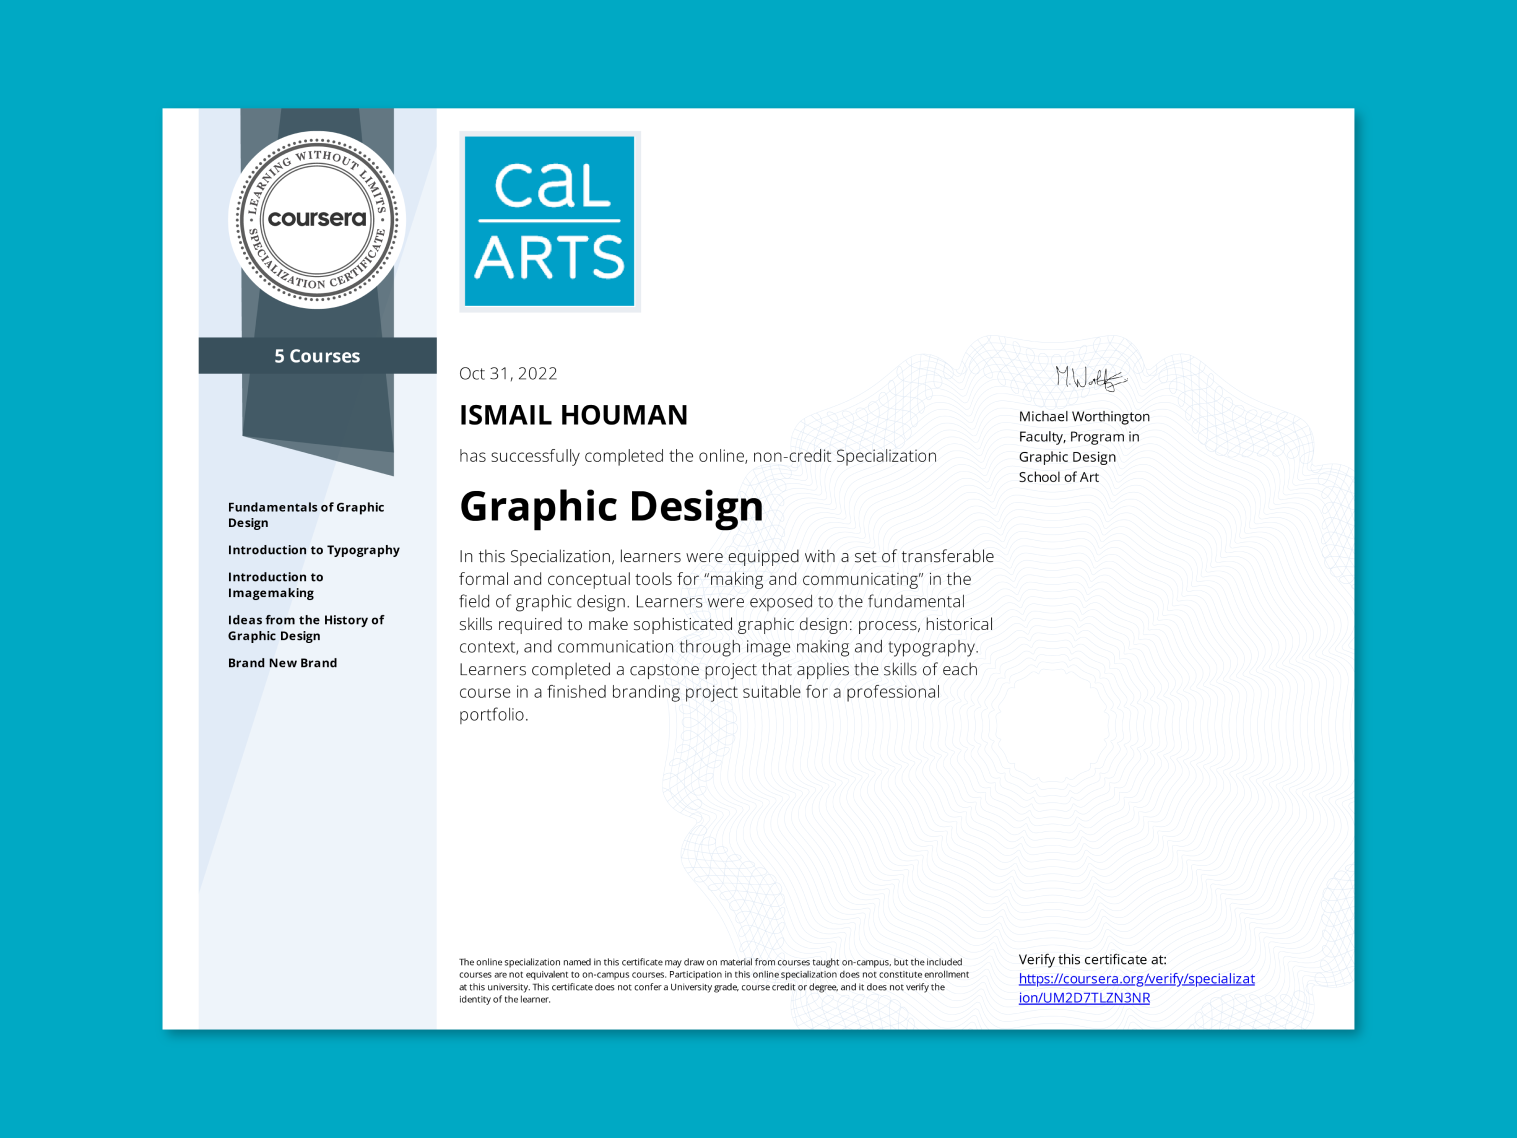 calarts-graphic-design-specialization-certificate-by-ismail-houman-on